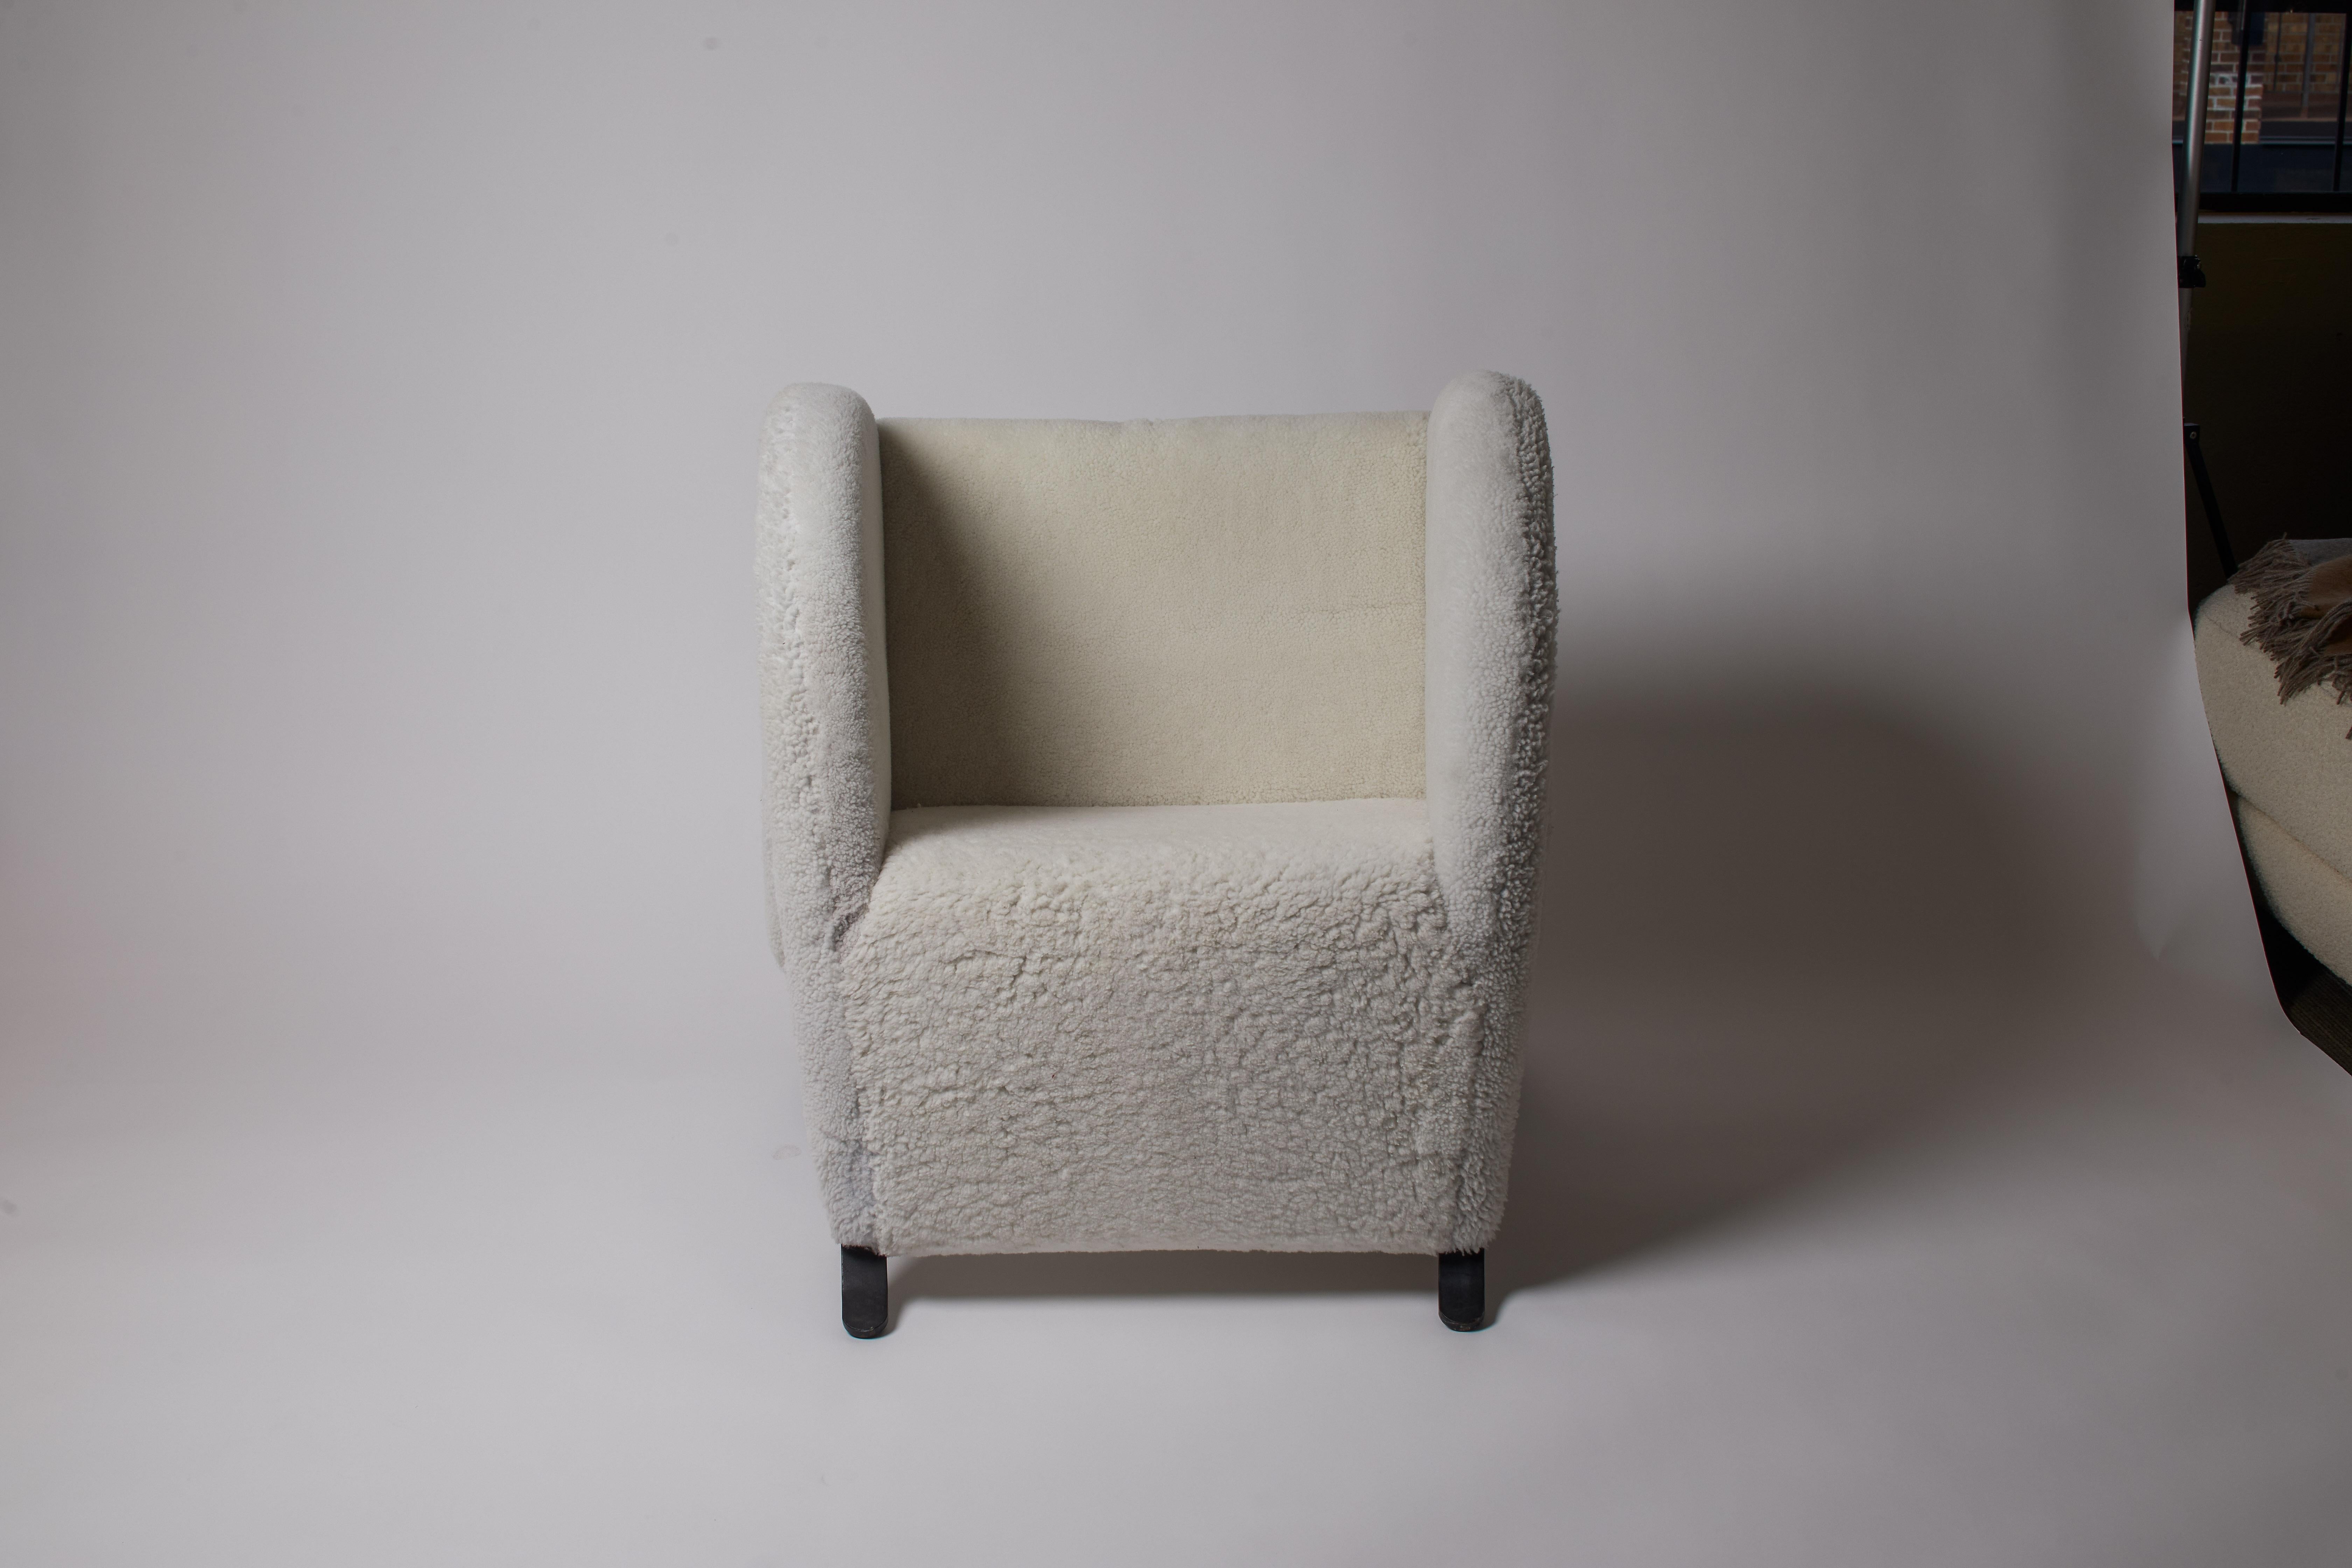 1950s Italian unique curved design architectural armchair with curly white shearling. Restored and reupholstered.